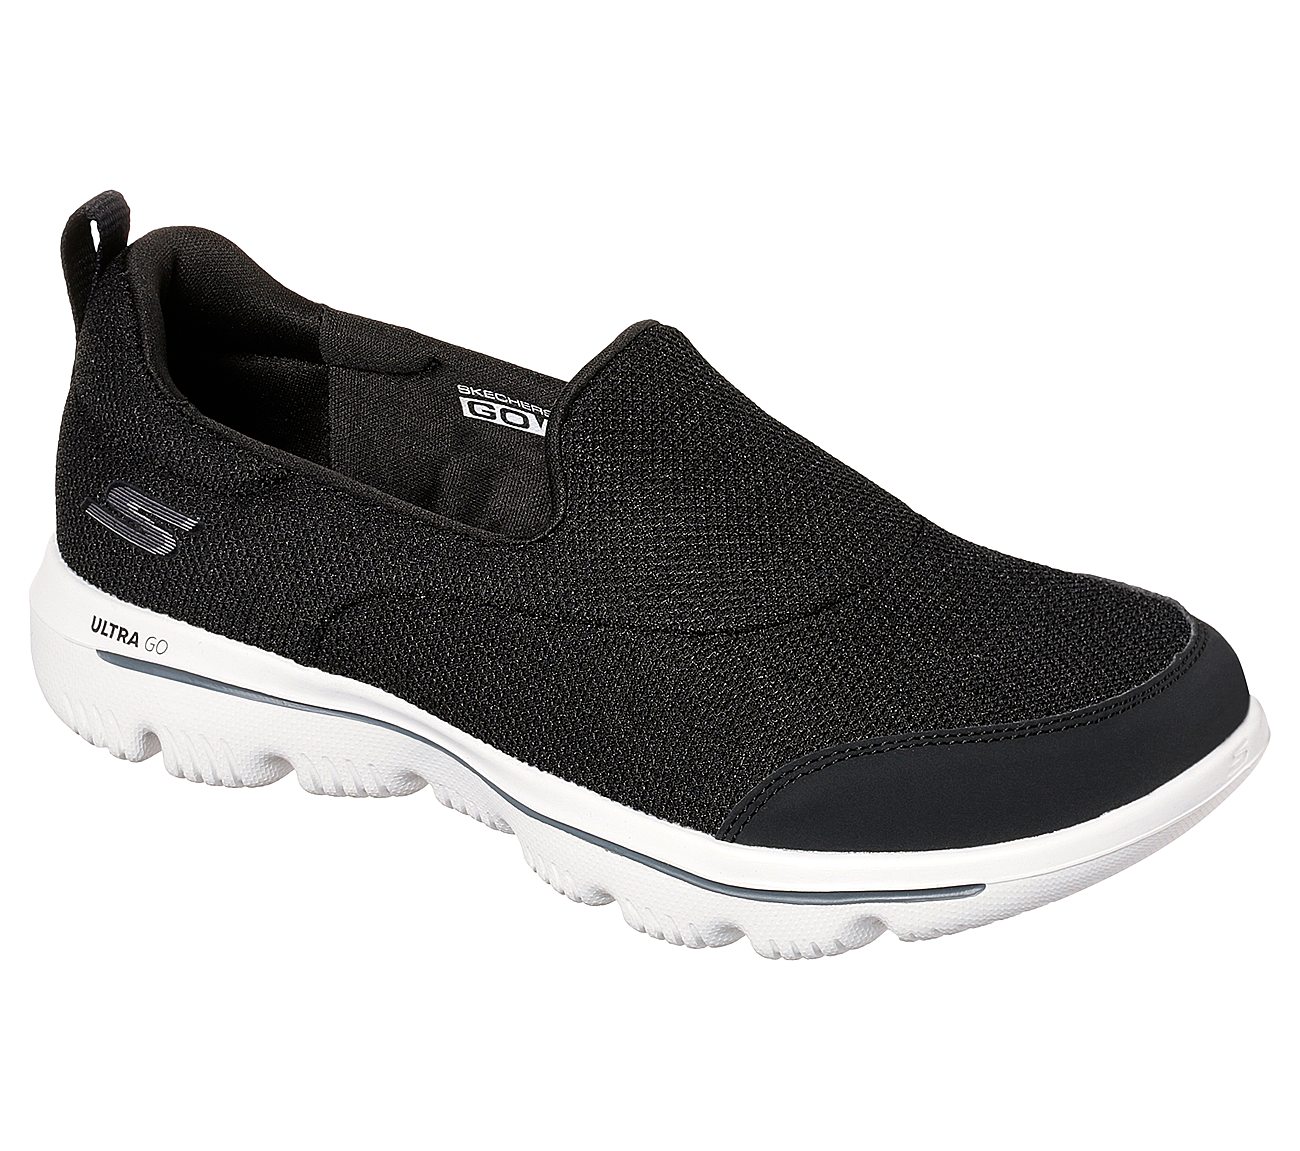 cheapest place to buy skechers